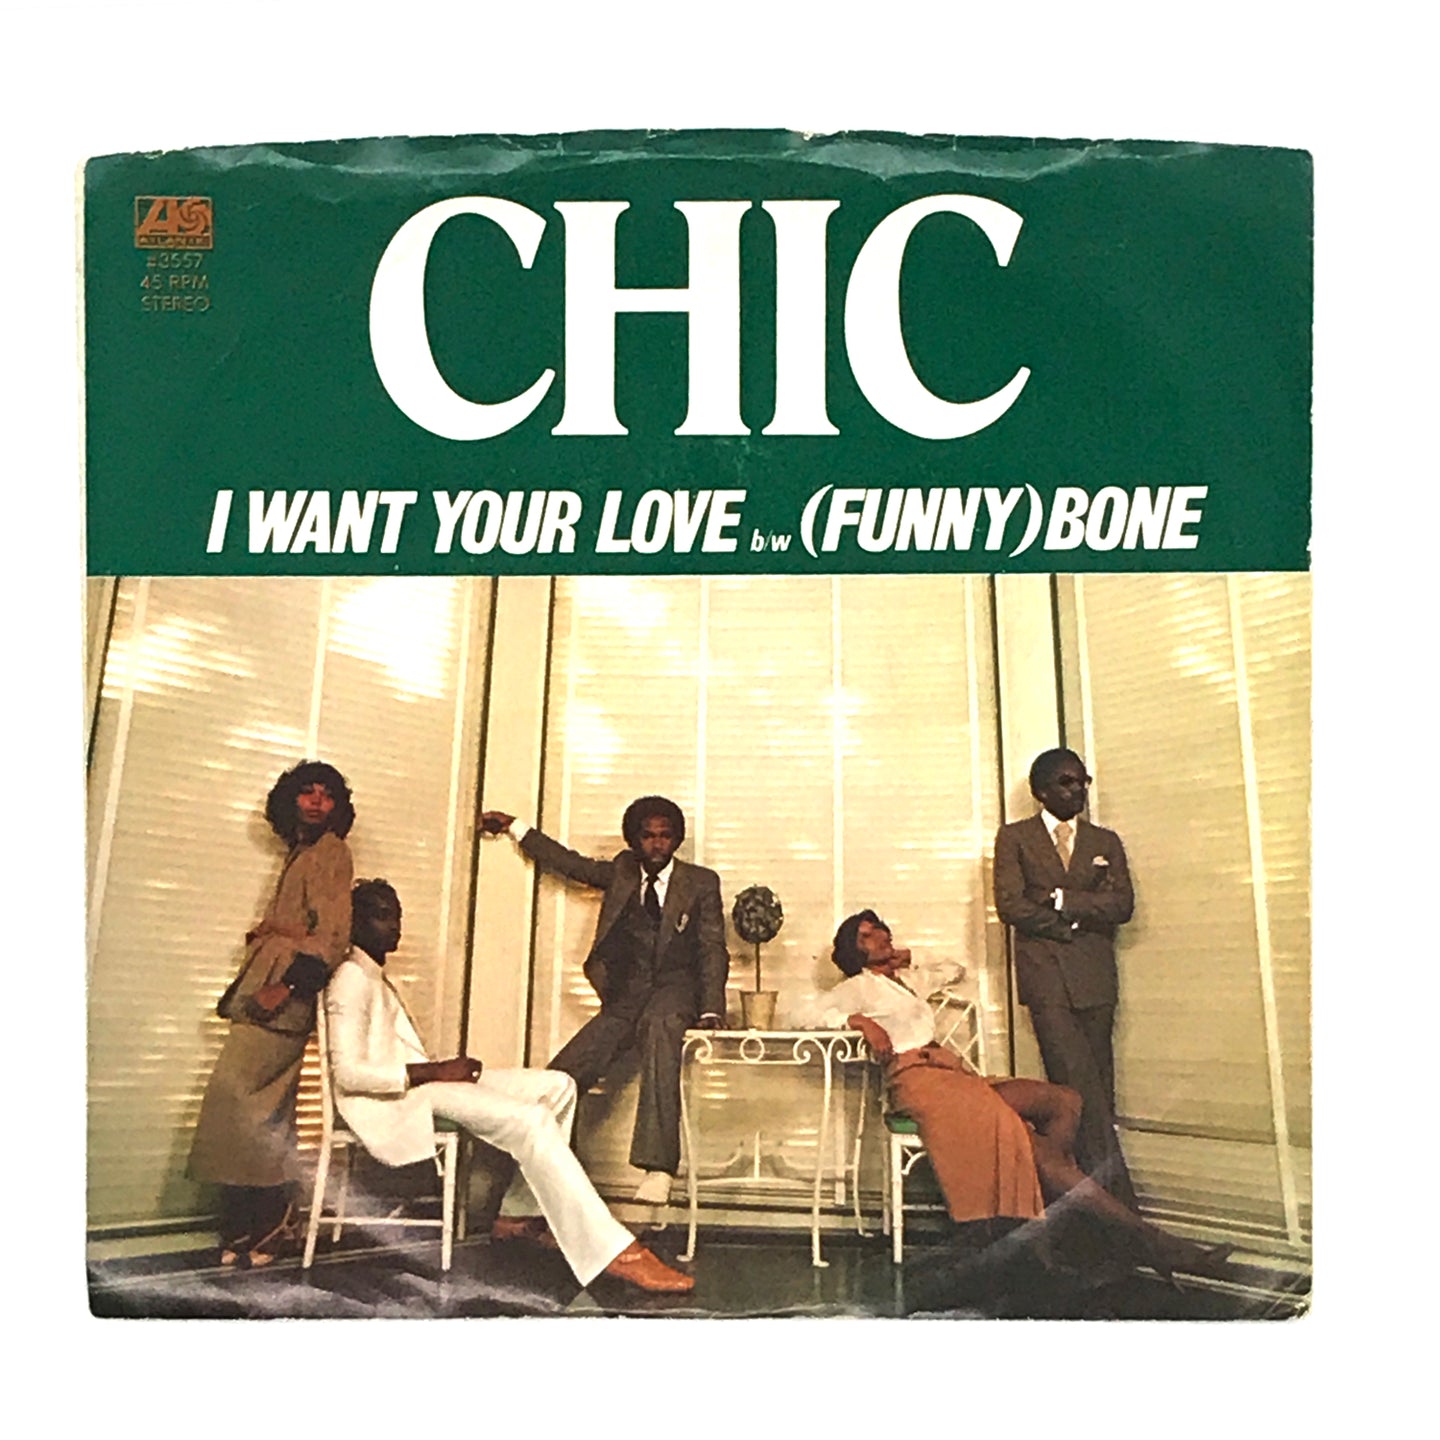 Chic : I WANT YOUR LOVE/ (FUNNY) BONE